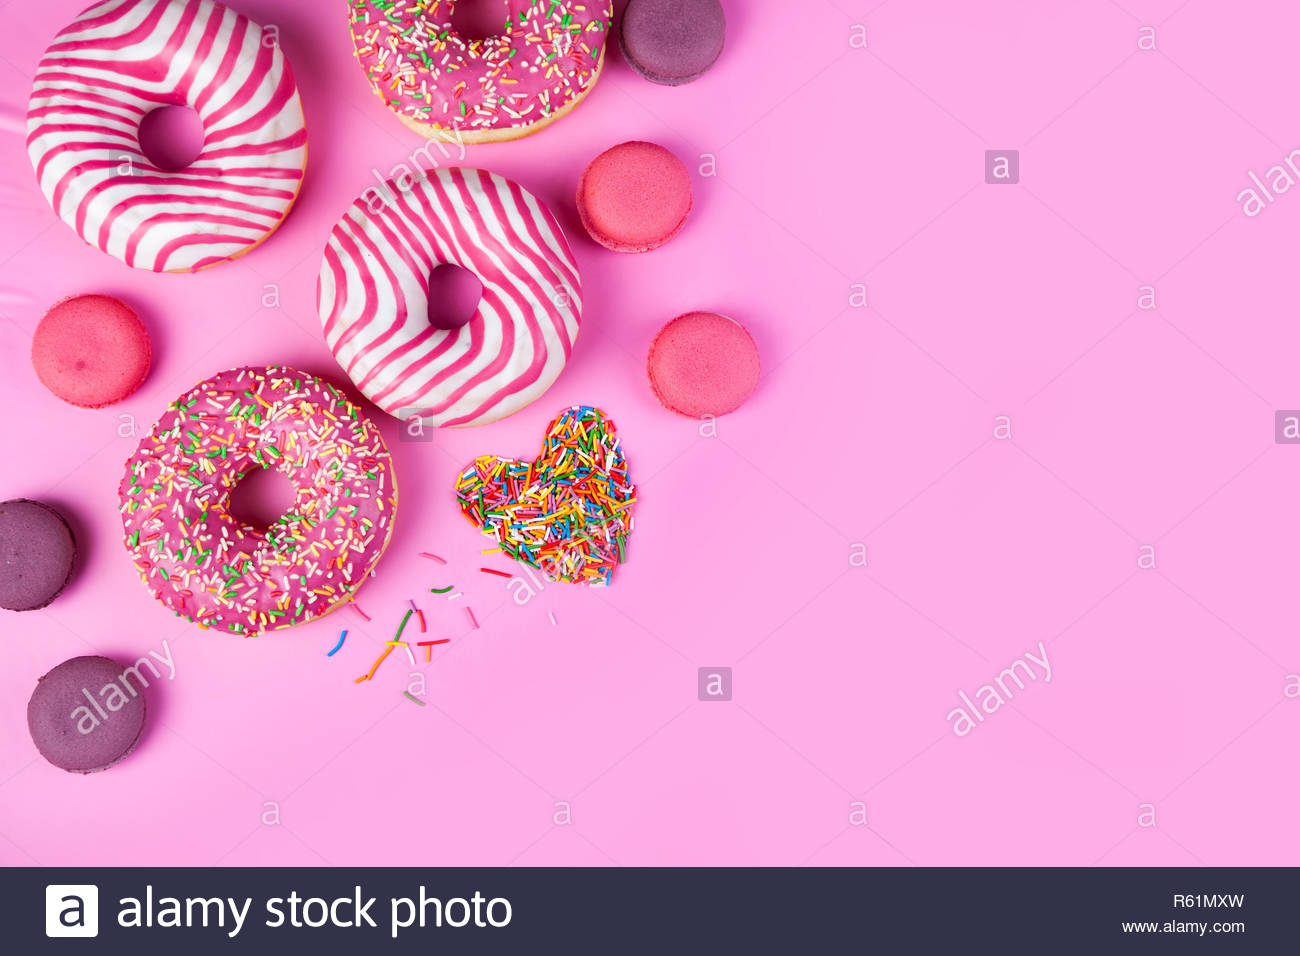 Donuts Macaroons And Confectionery Heart On A Pink Background